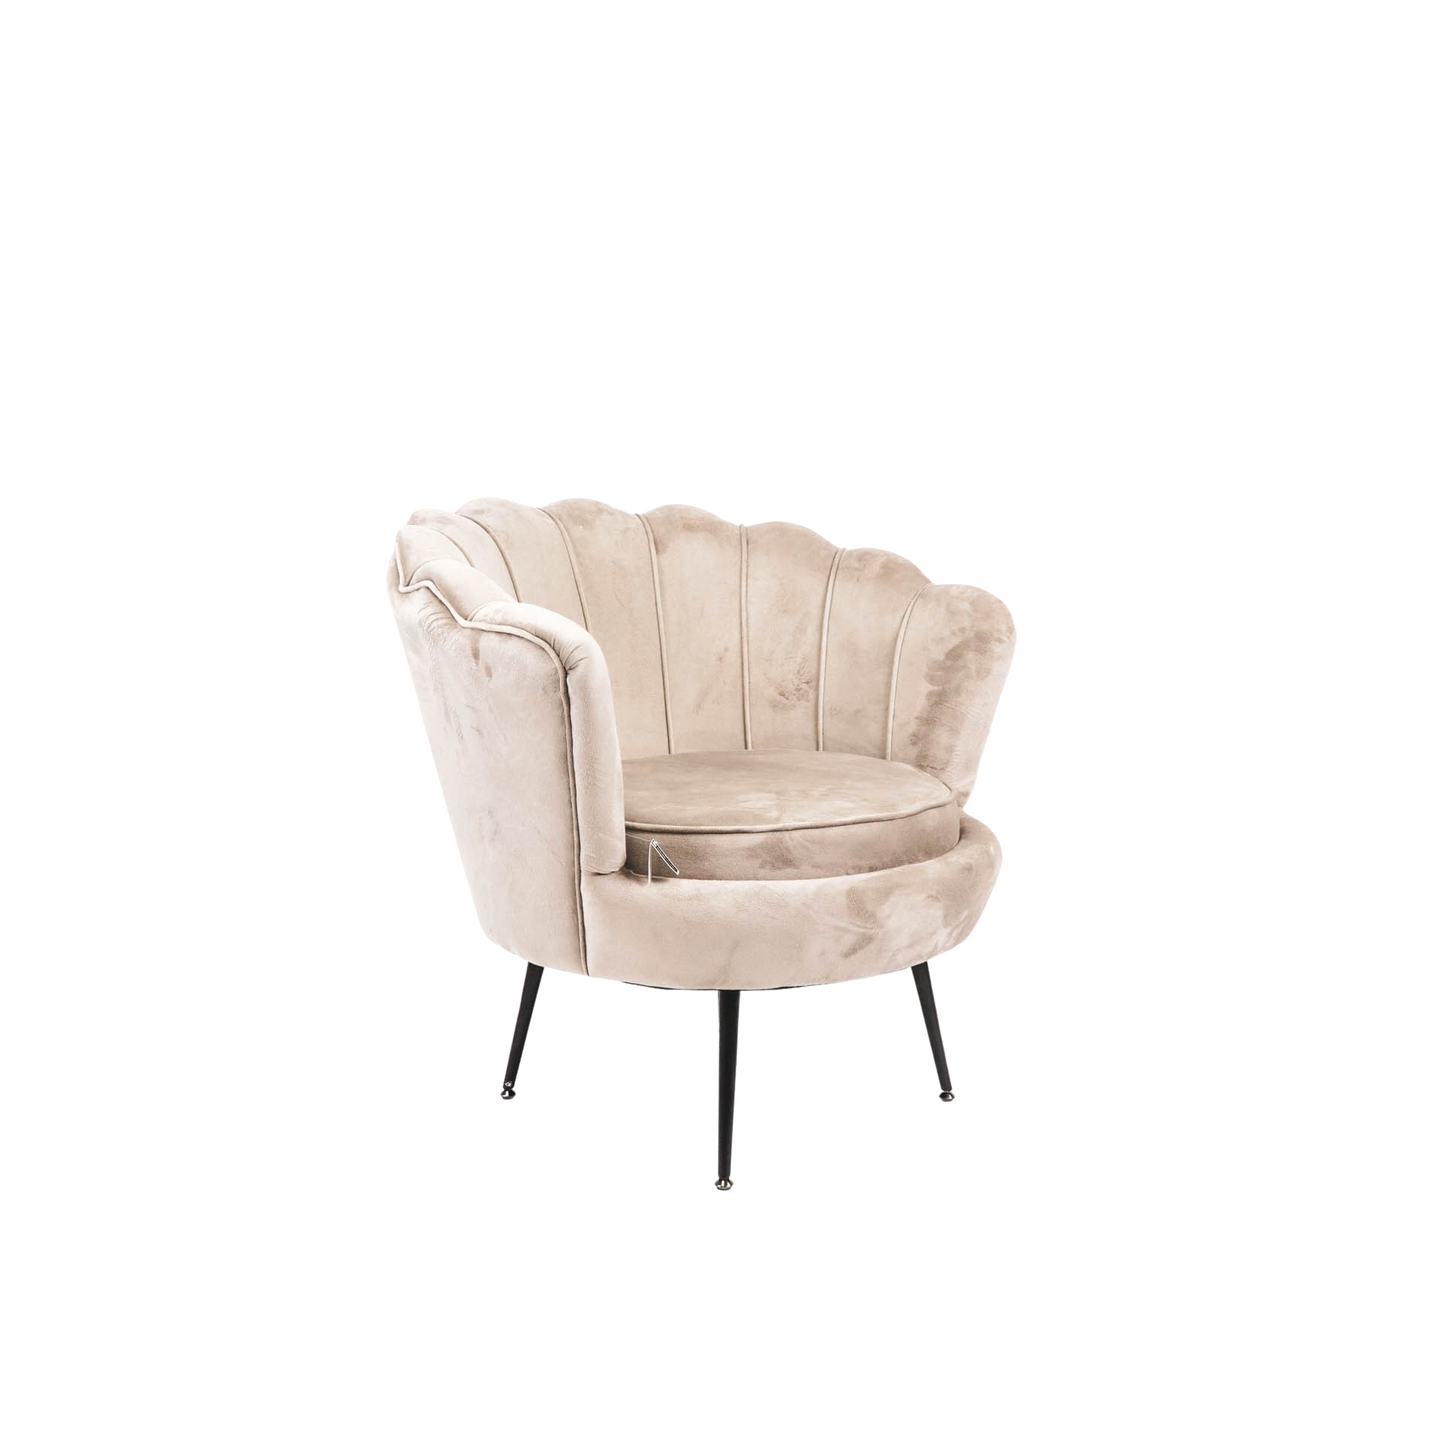 HV Fauteuil Chair Shell - Taupe/Brown